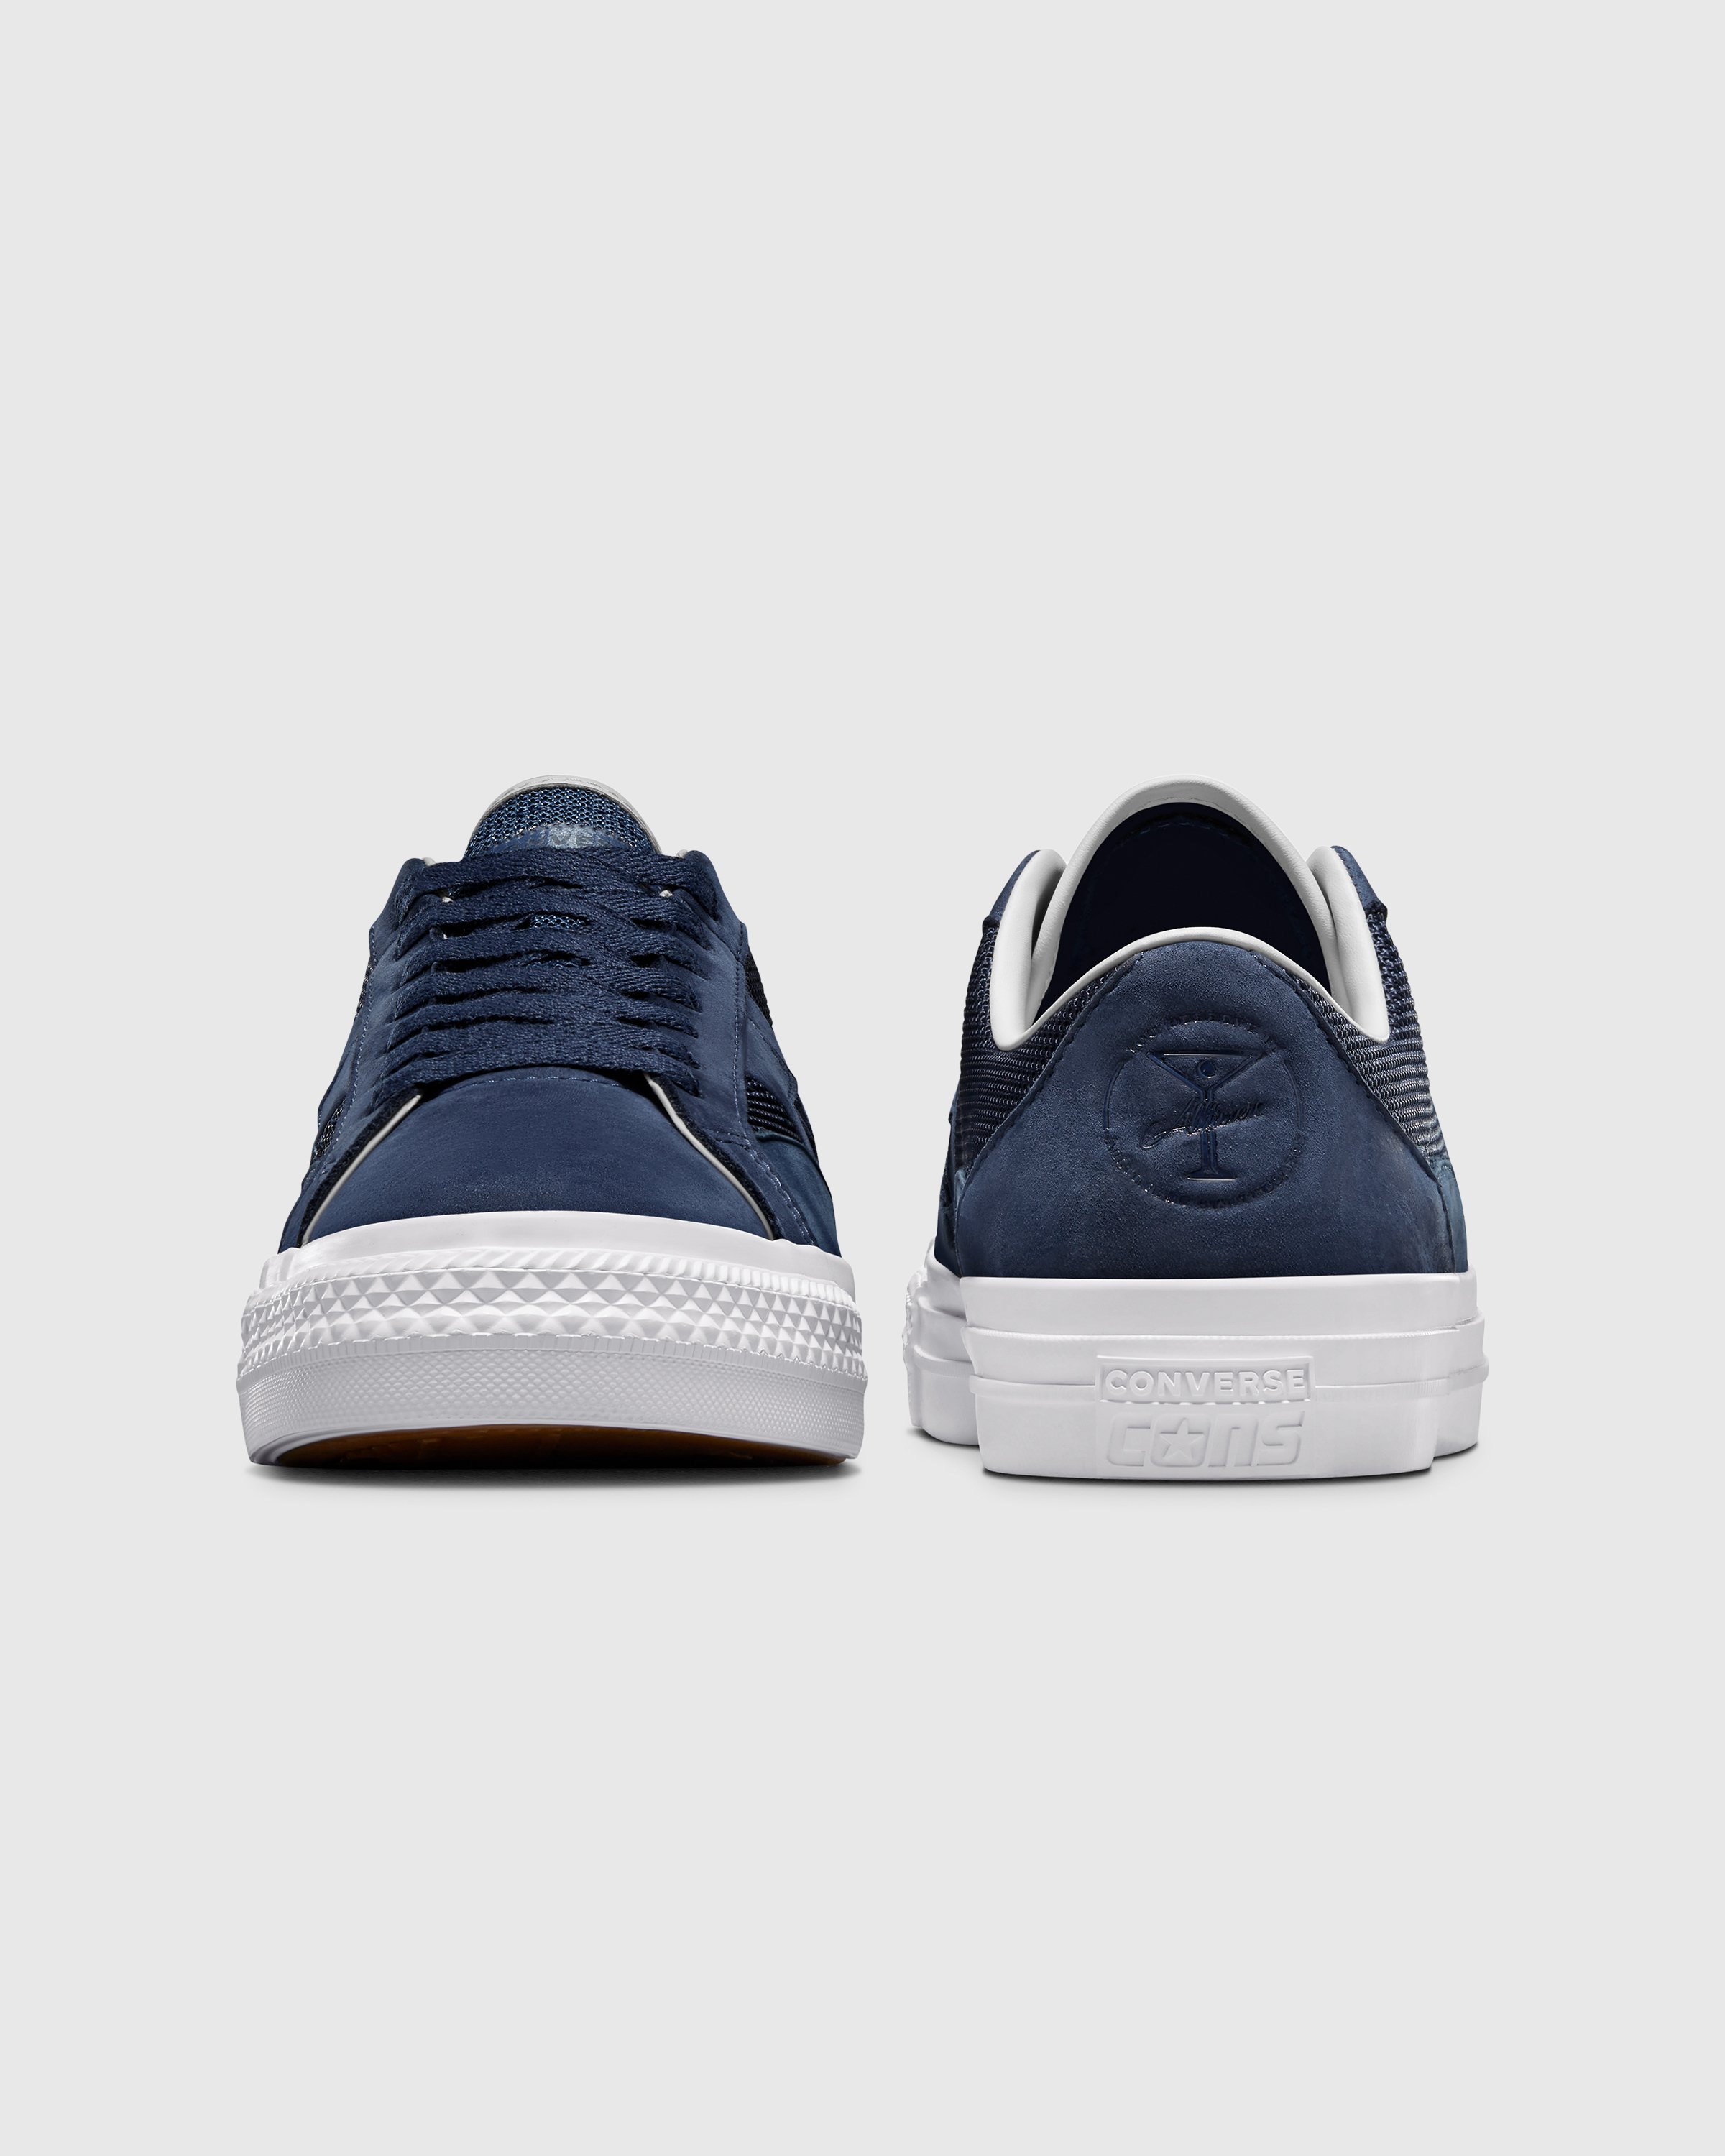 Converse - CONS x Alltimers ONE STAR PRO OX Midnight Navy/Navy - Footwear - Blue - Image 5